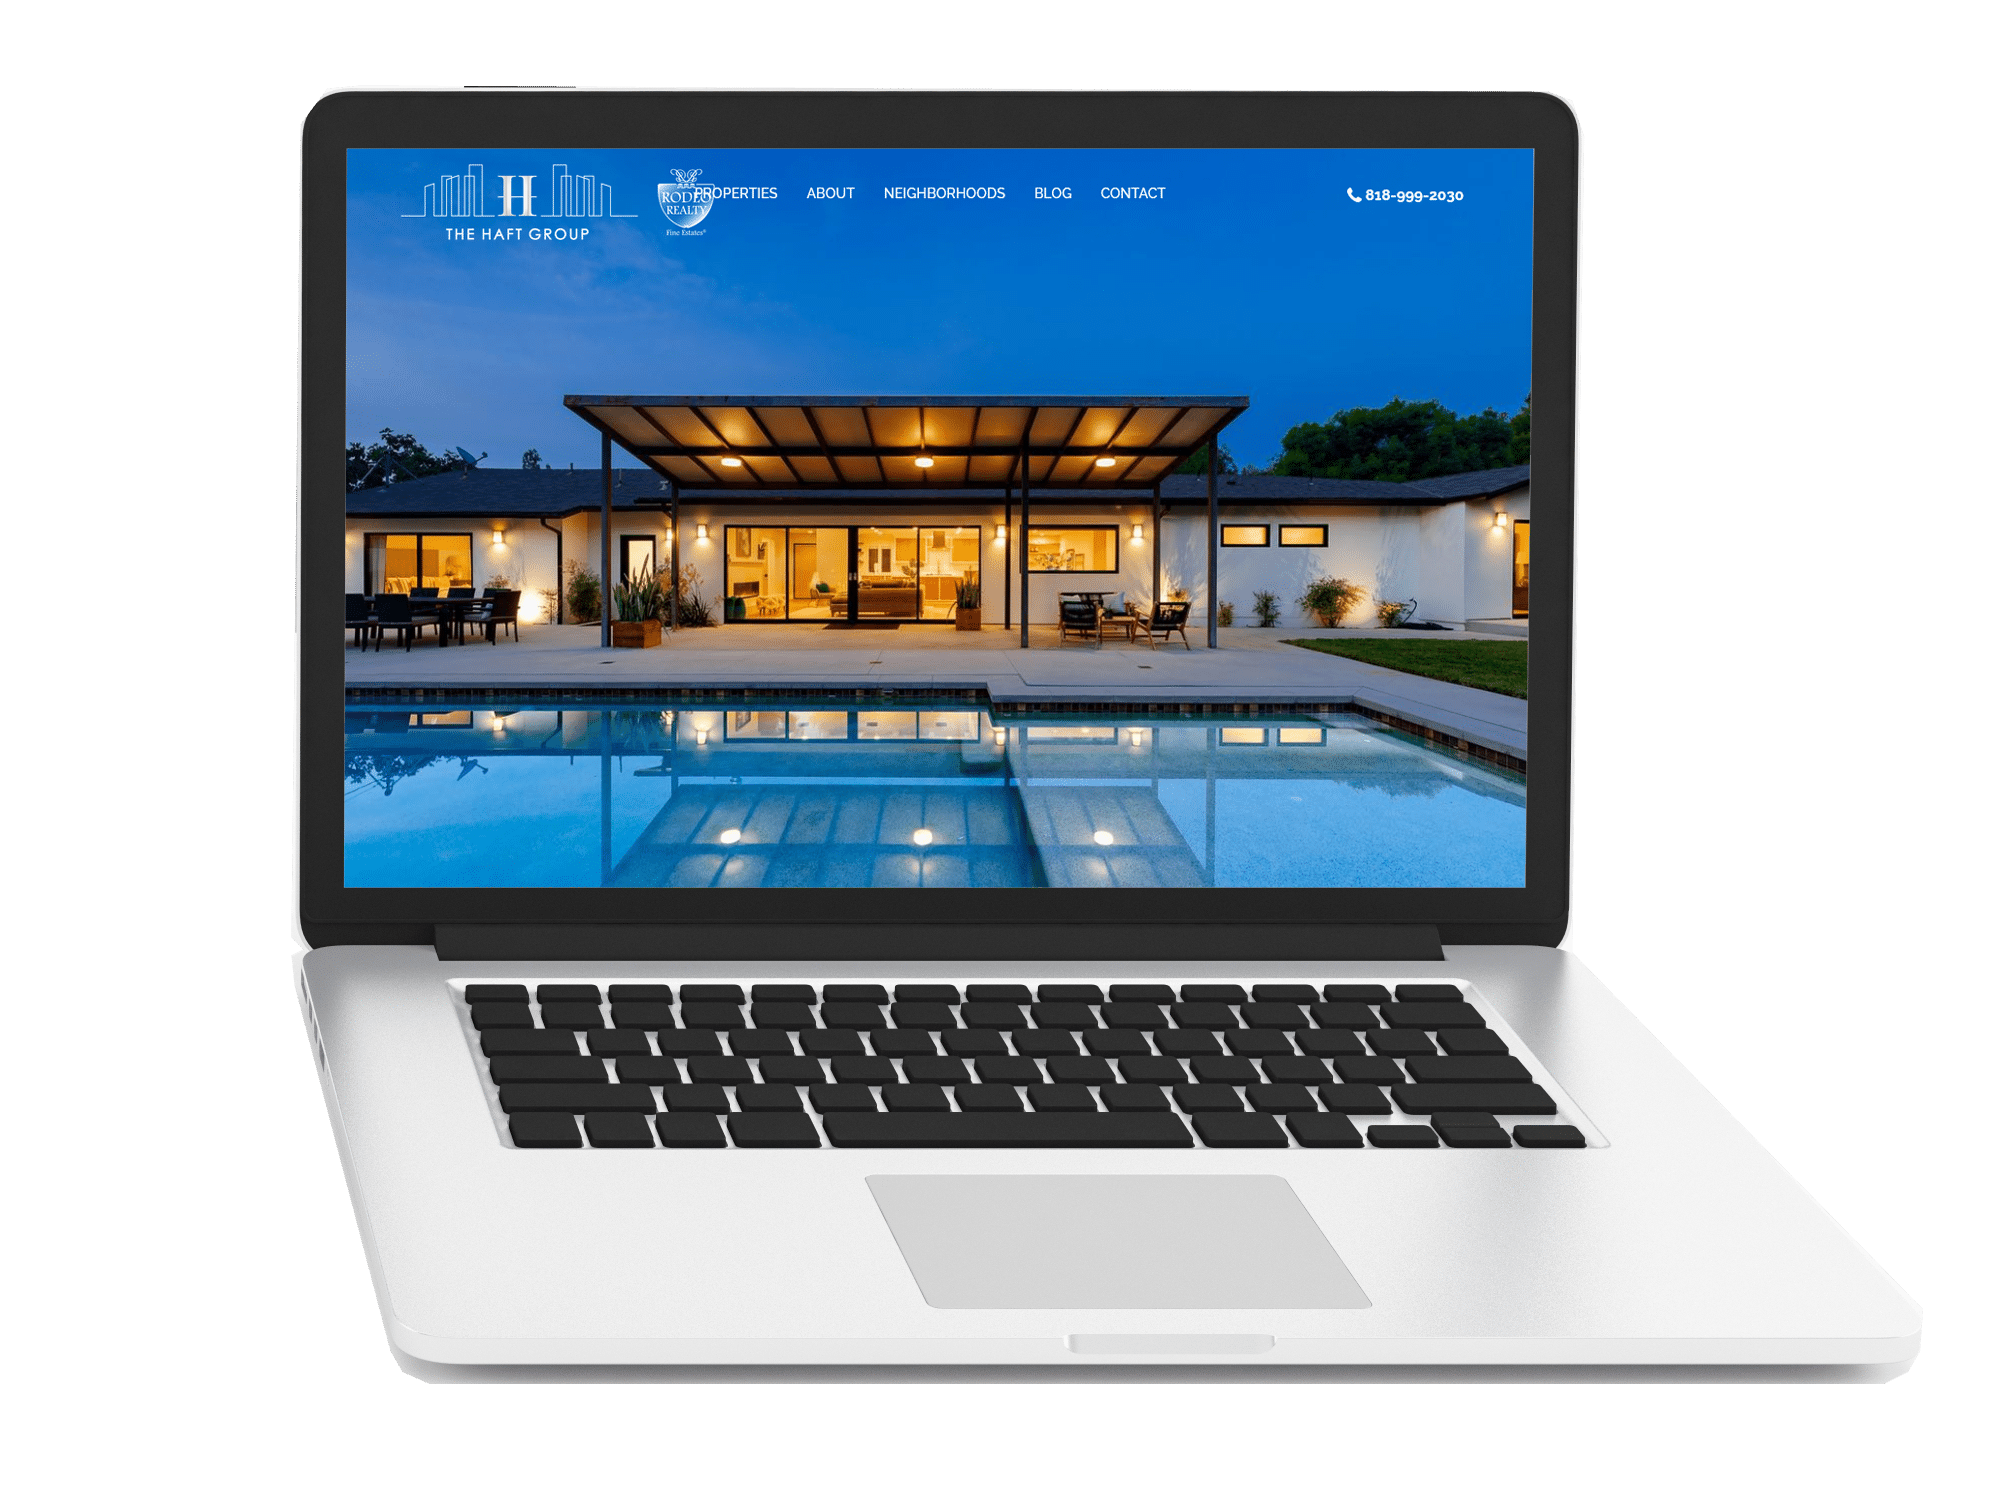 Luxury website design for real estate agents and realtors